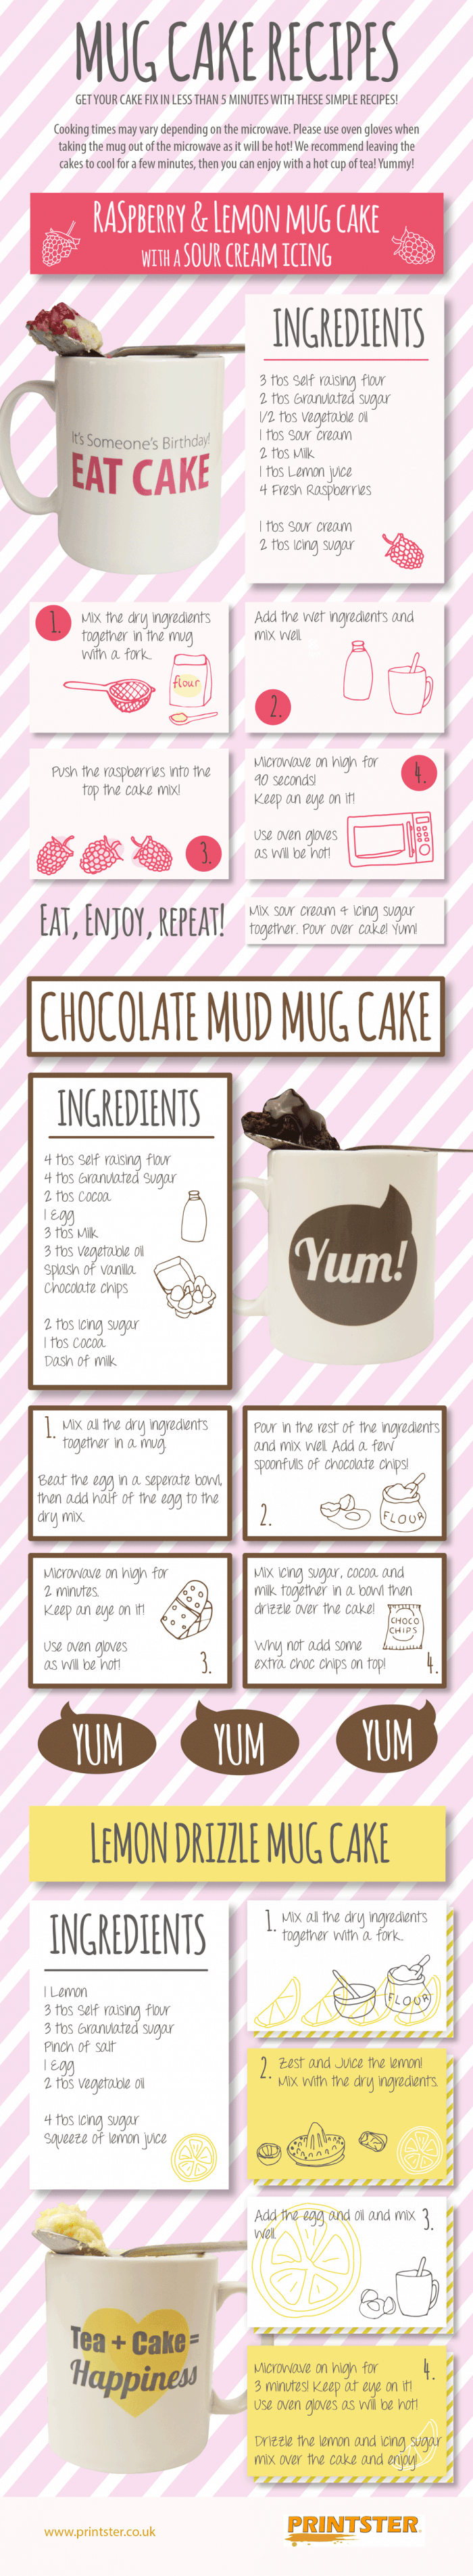 Instructions on how to make three cake recipes in a mug